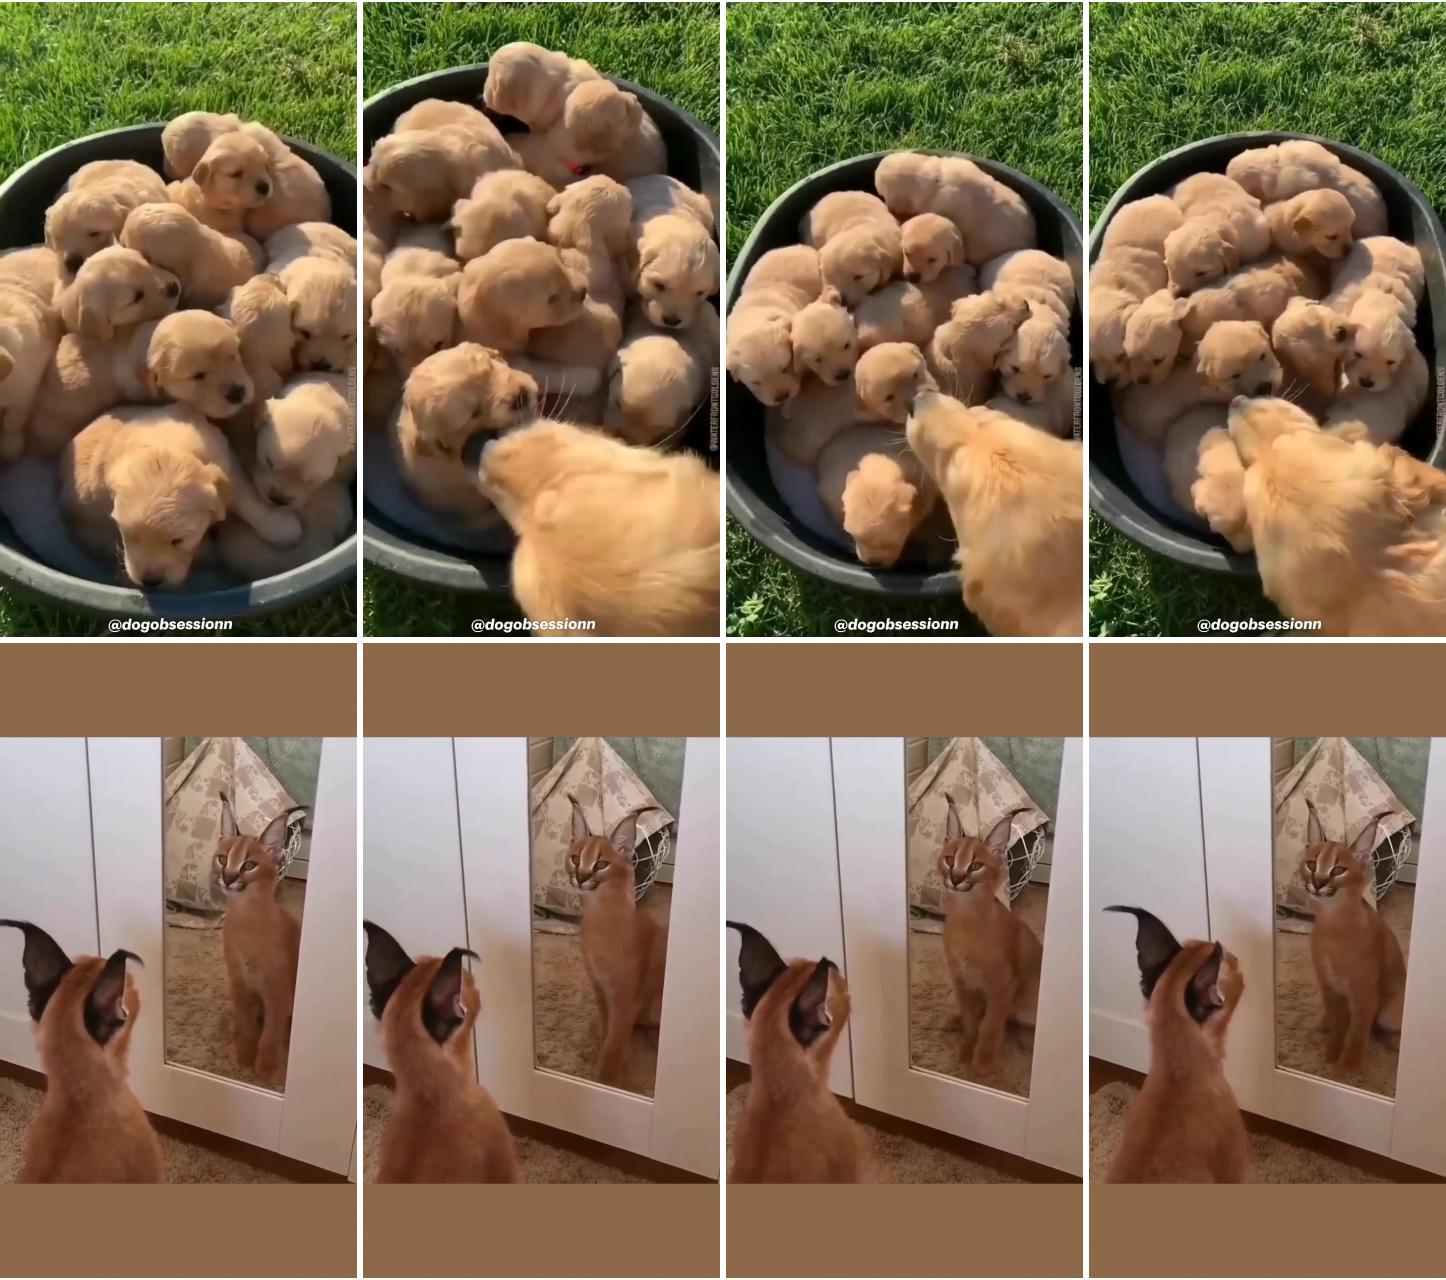 Woof videos; neat, look what i can do with my ears